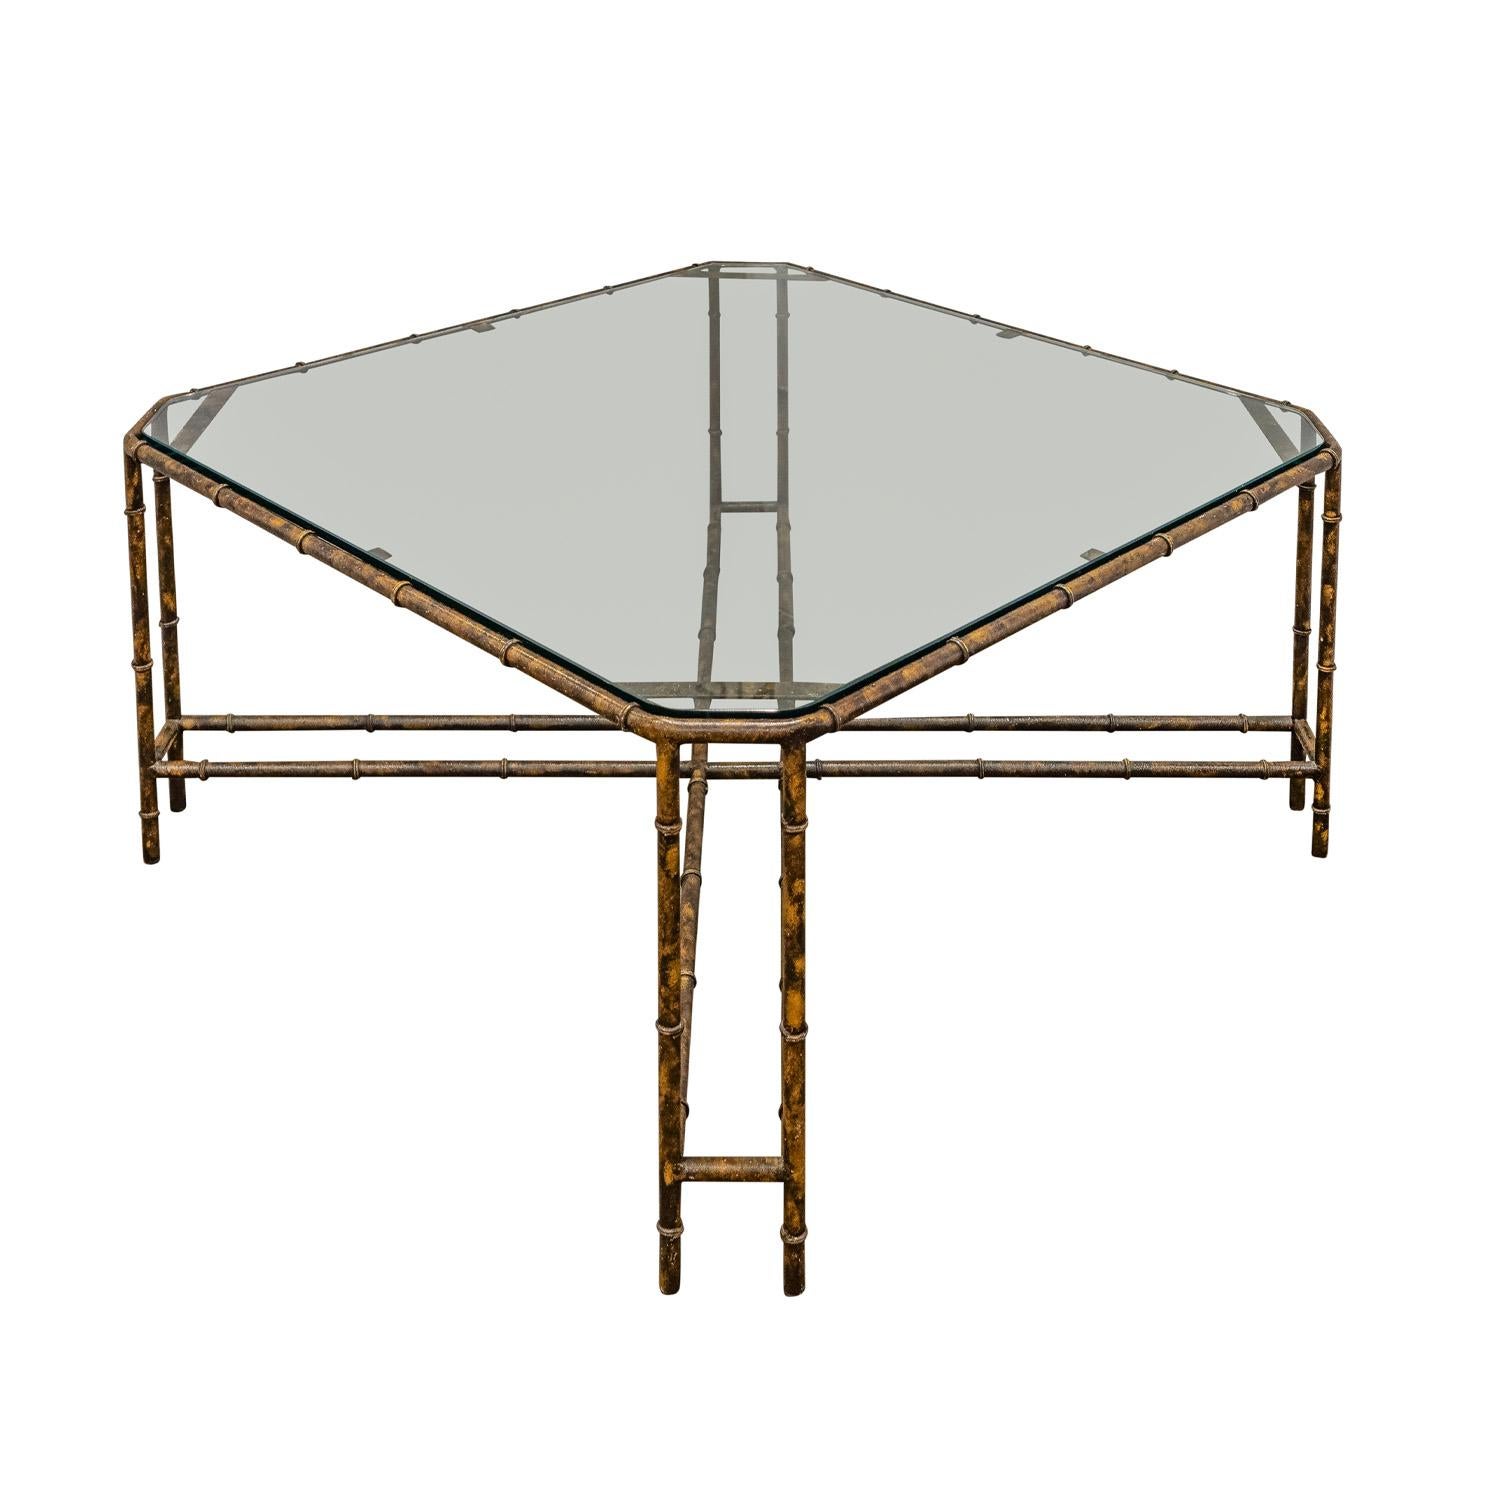 Mid-Century Modern Stylish Bamboo Motif Coffee Table in Patinated Bronze 1970s For Sale